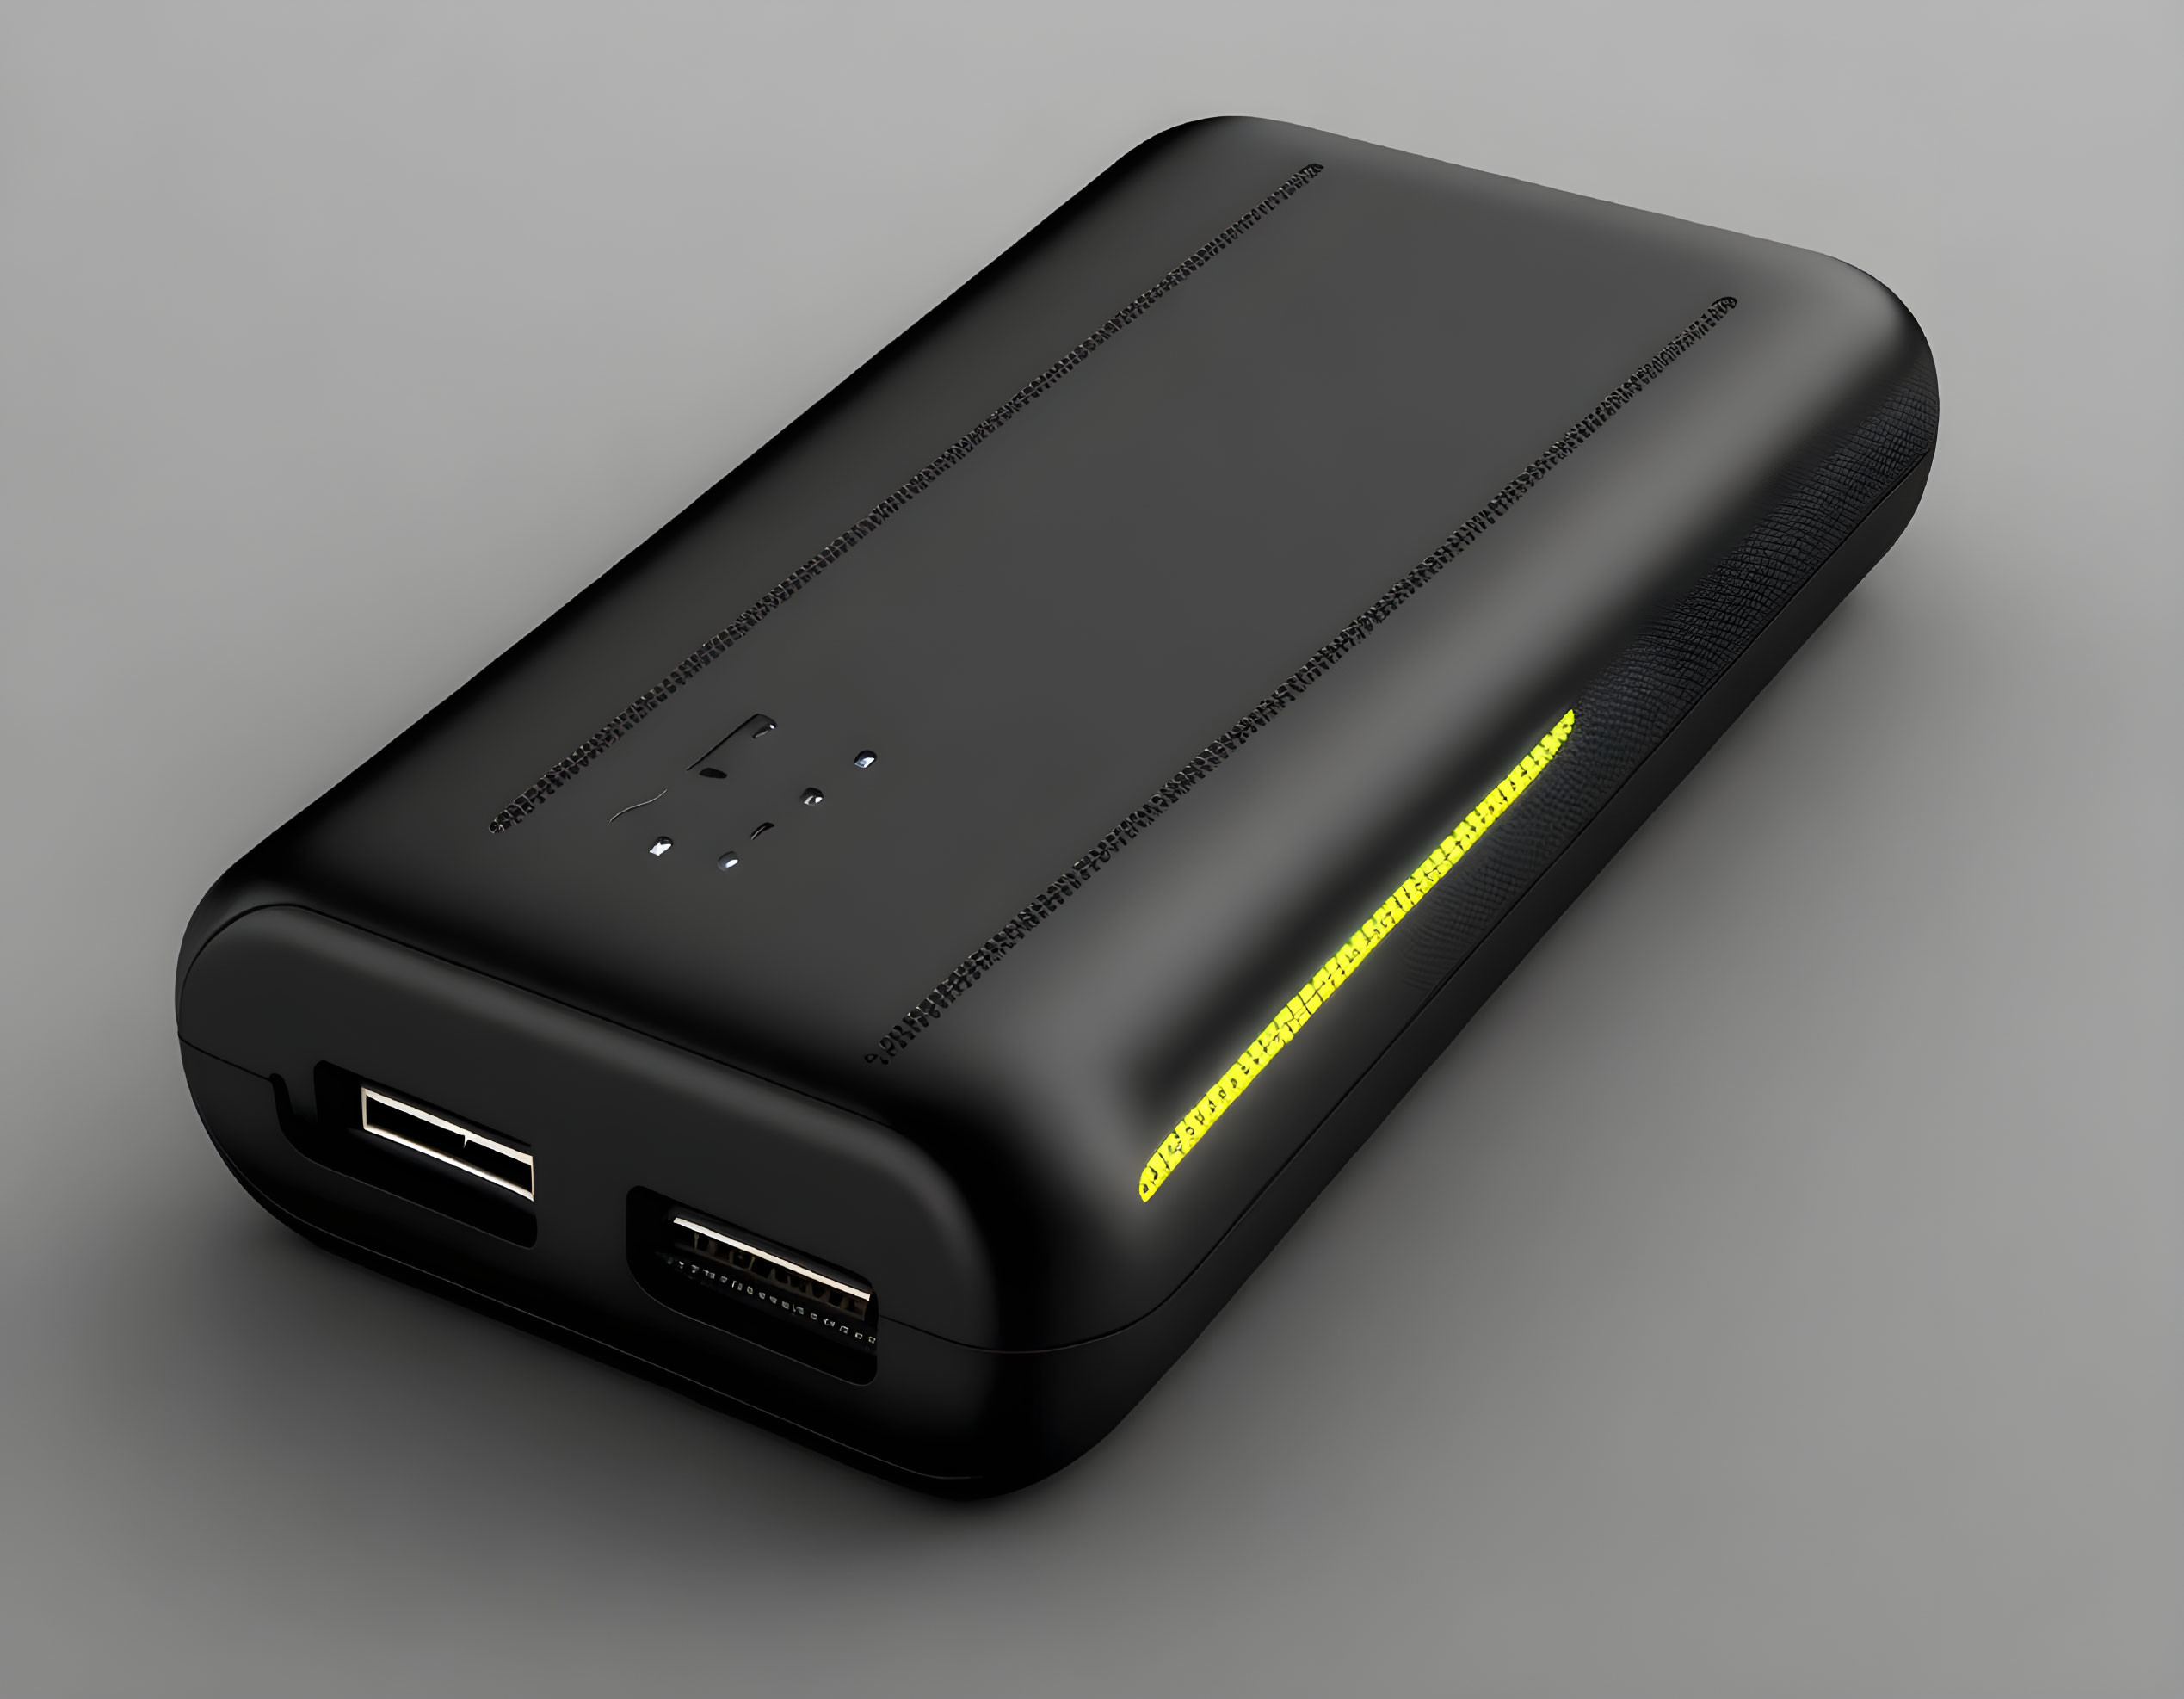 Compact Black Power Bank with LED Indicators & USB Ports on Gray Background